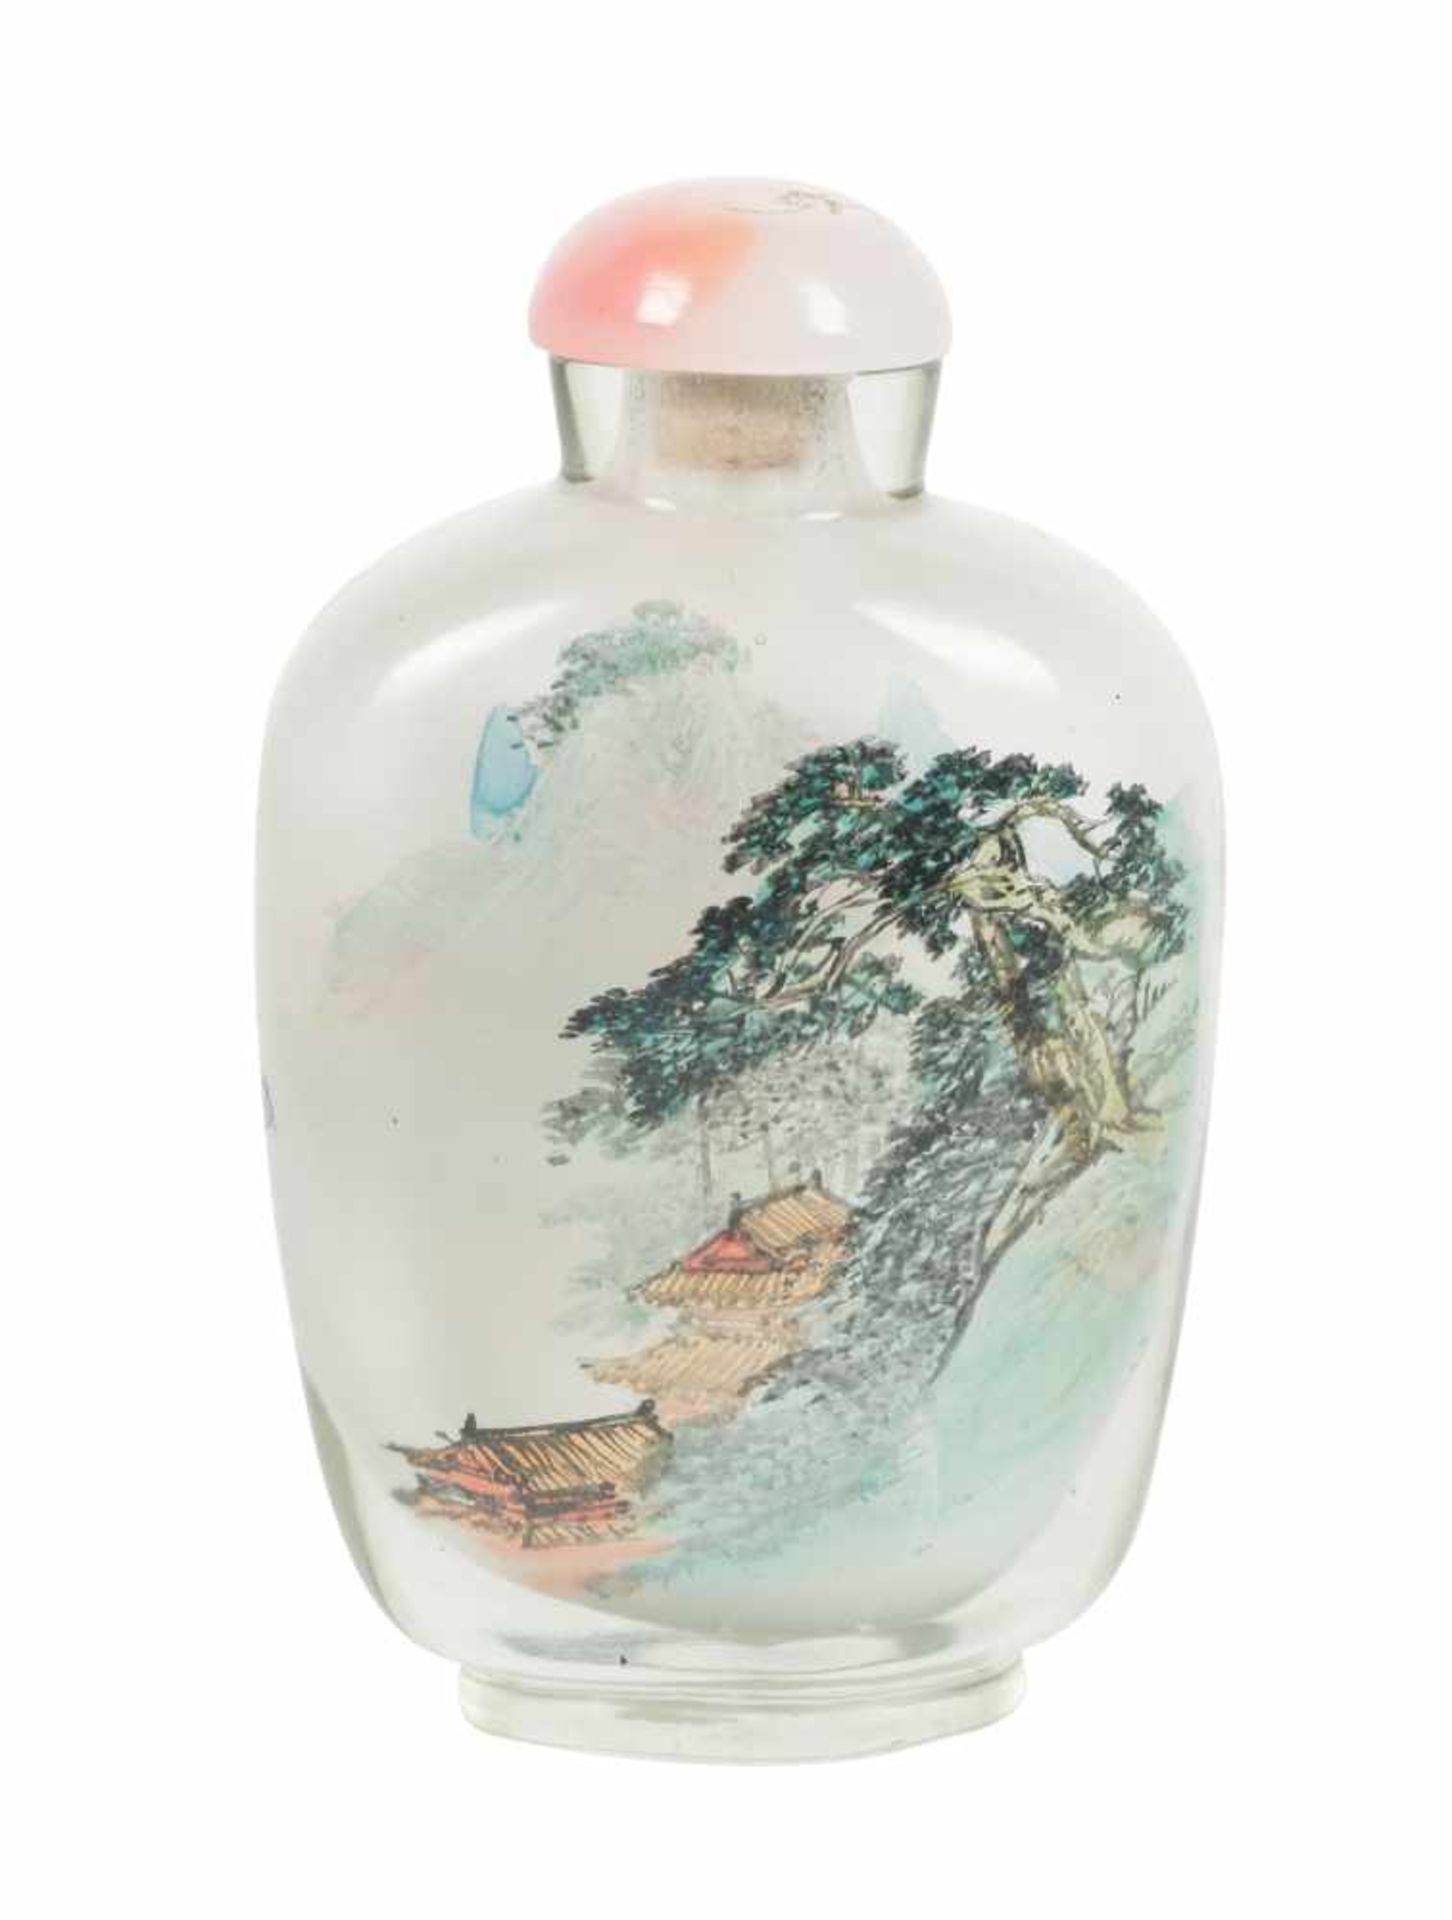 An inside painted glass snuff bottle with a rose quartz stopper. China. Qing dynasty. Early 20th